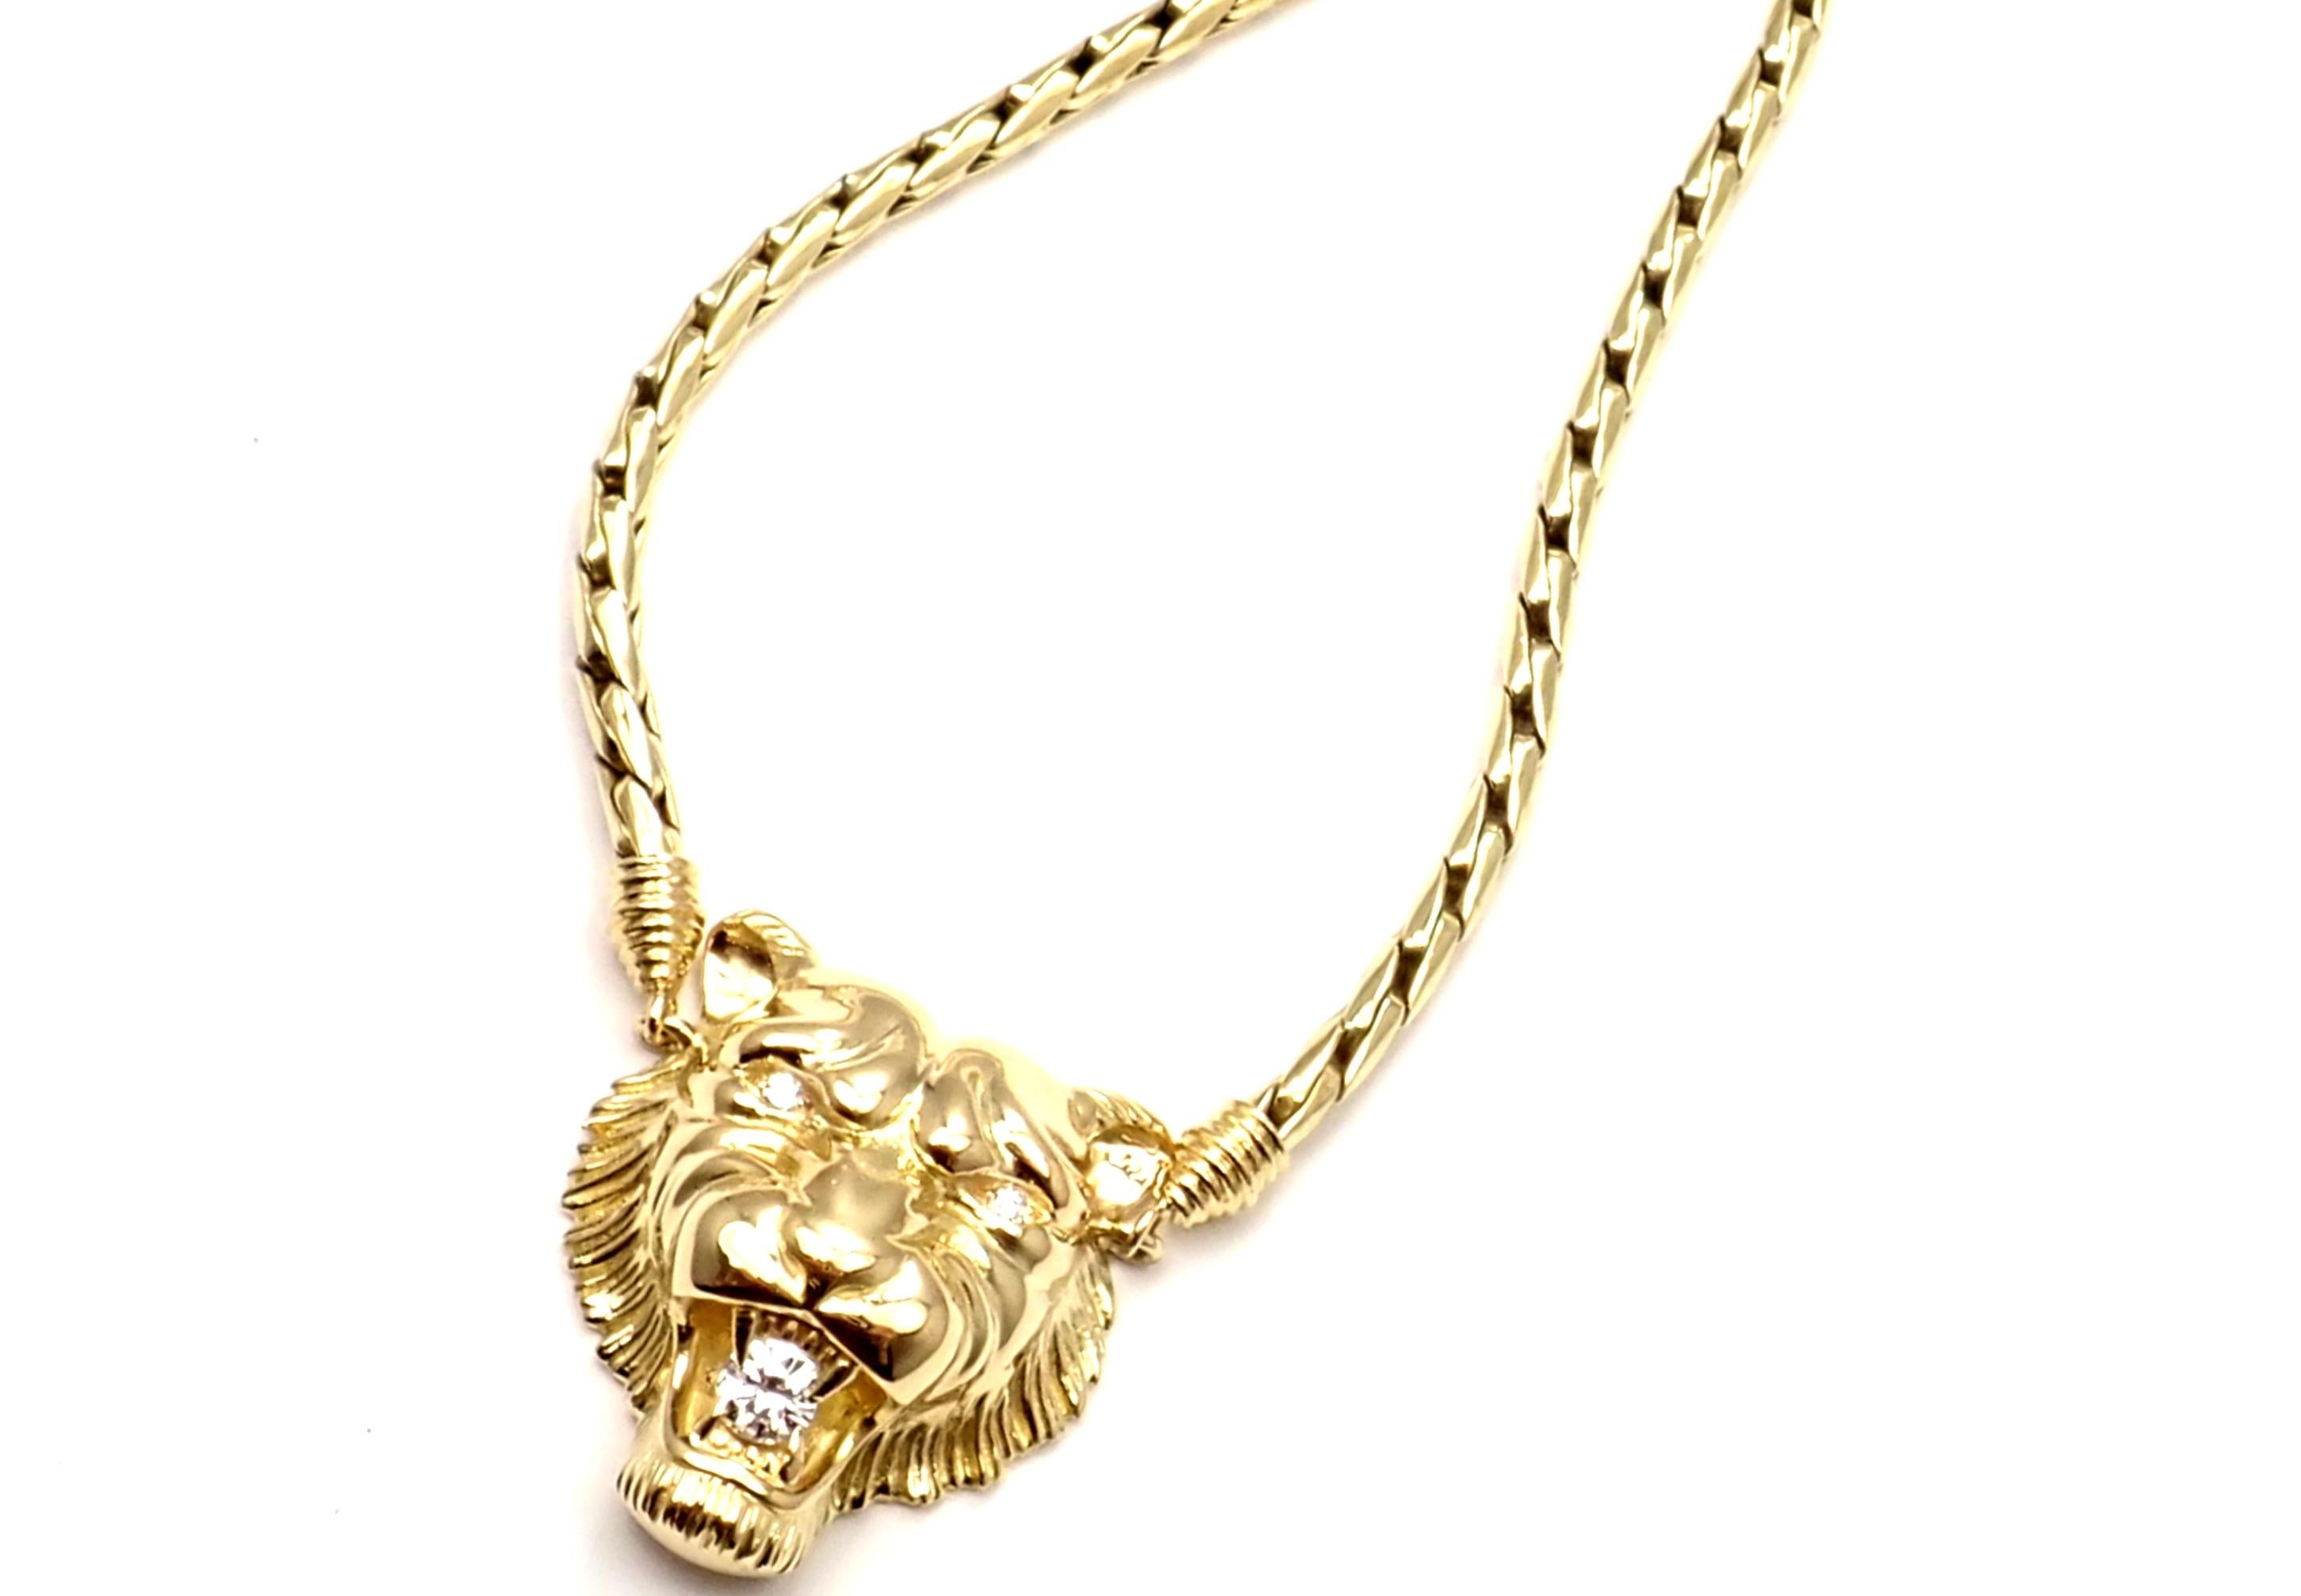 18k Yellow Gold Diamond Lion Pendant Necklace by Piaget. 
With 3 round brilliant cut diamonds VS1 clarity, G color total weight approximately .45ct
Details: 
Length: 17